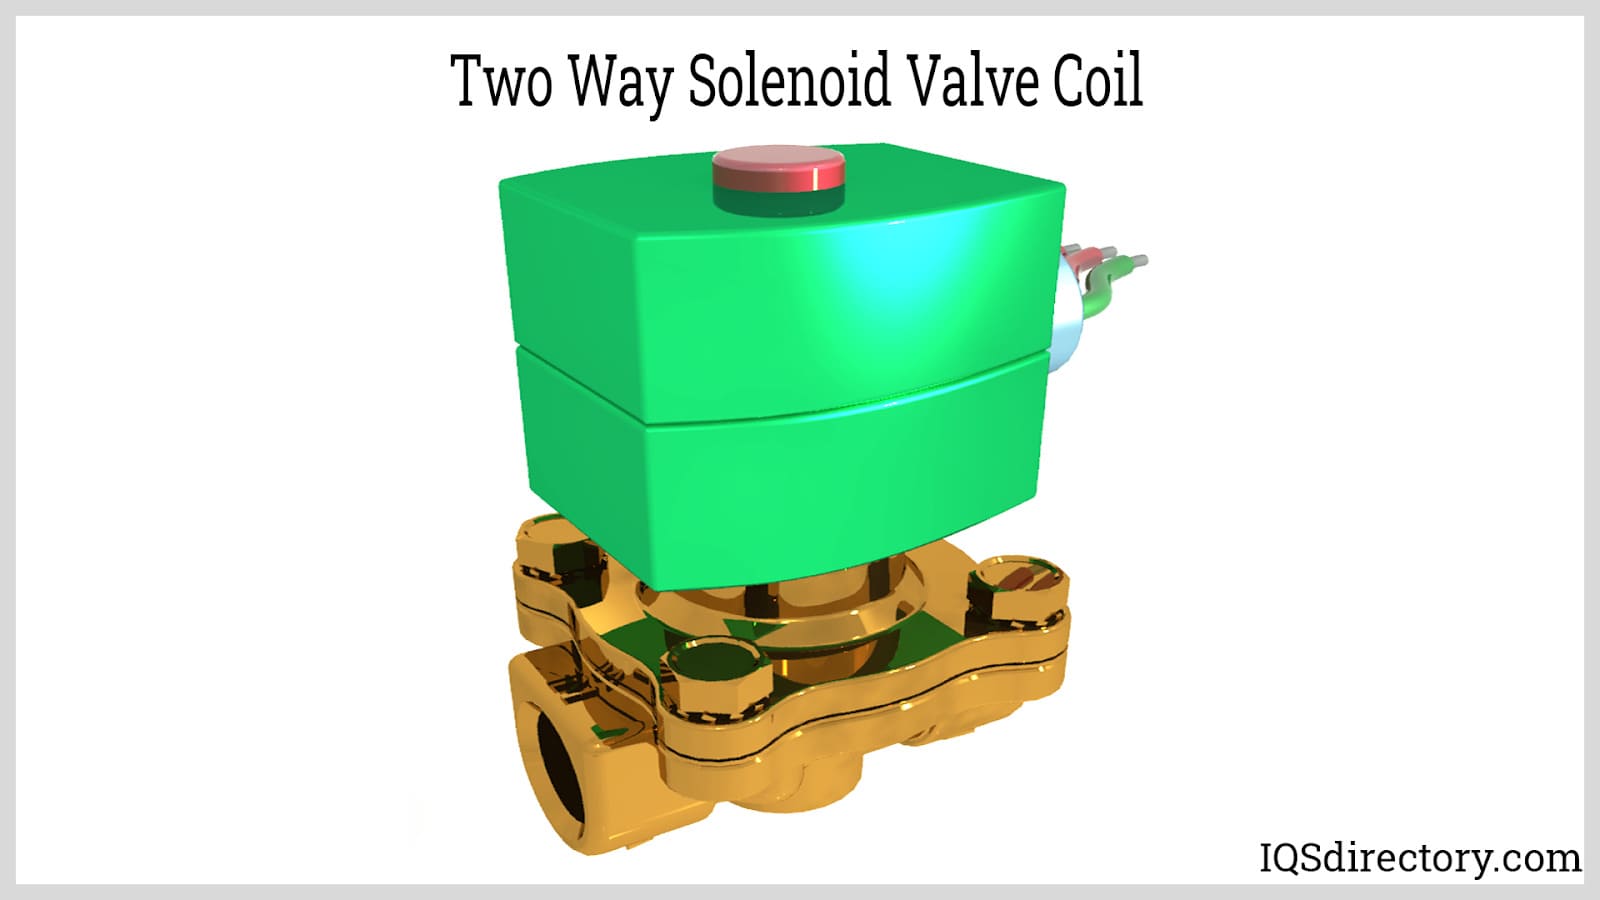 Two Way Solenoid Valve Coil